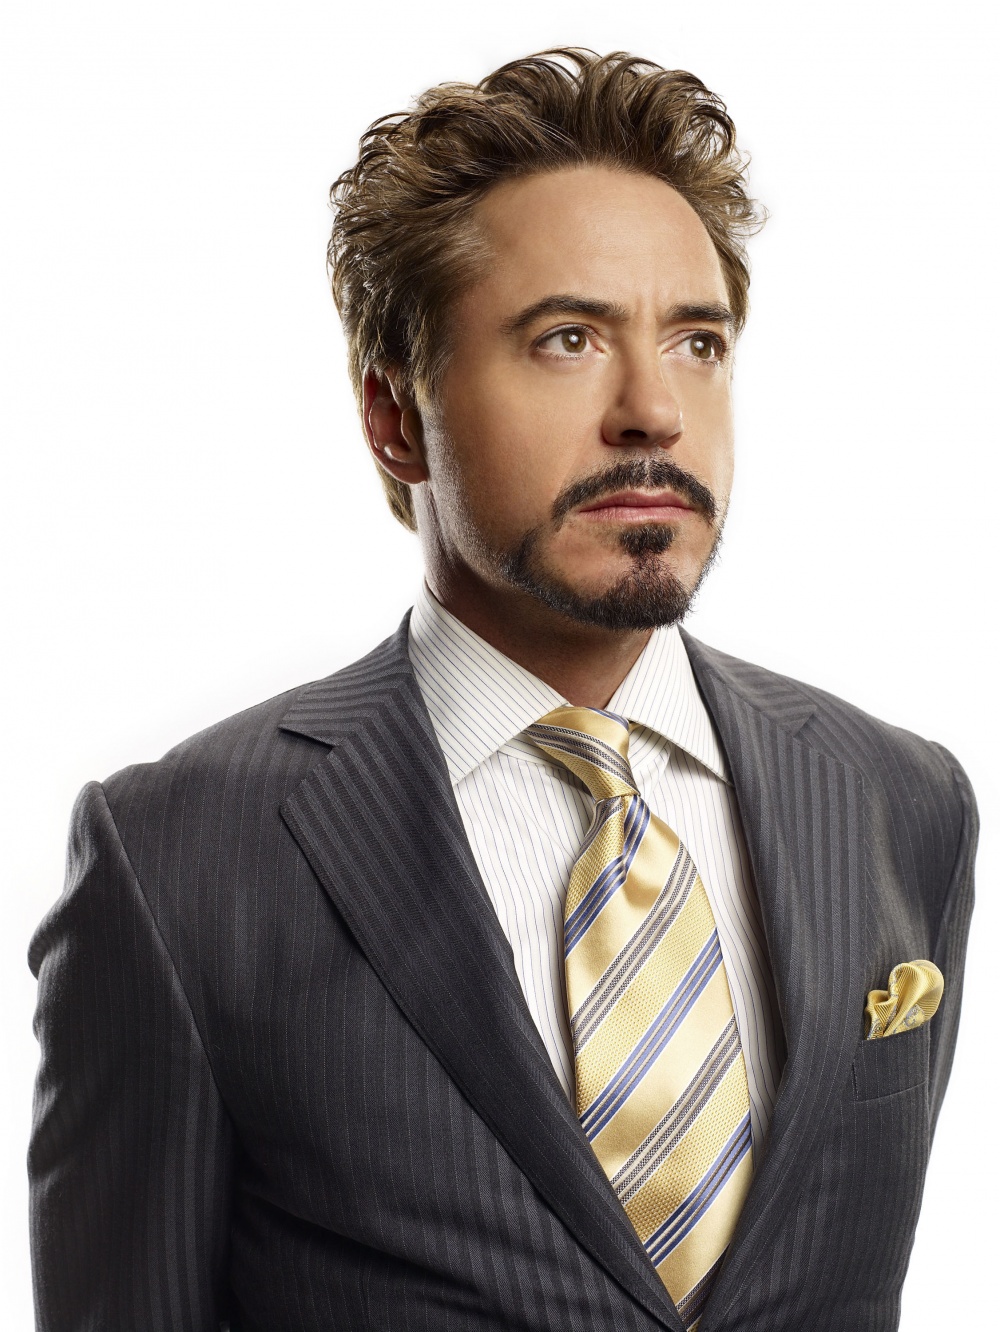 Robert Downey Jr's Stylish Flipped Up Hairstyle from Iron Man 2